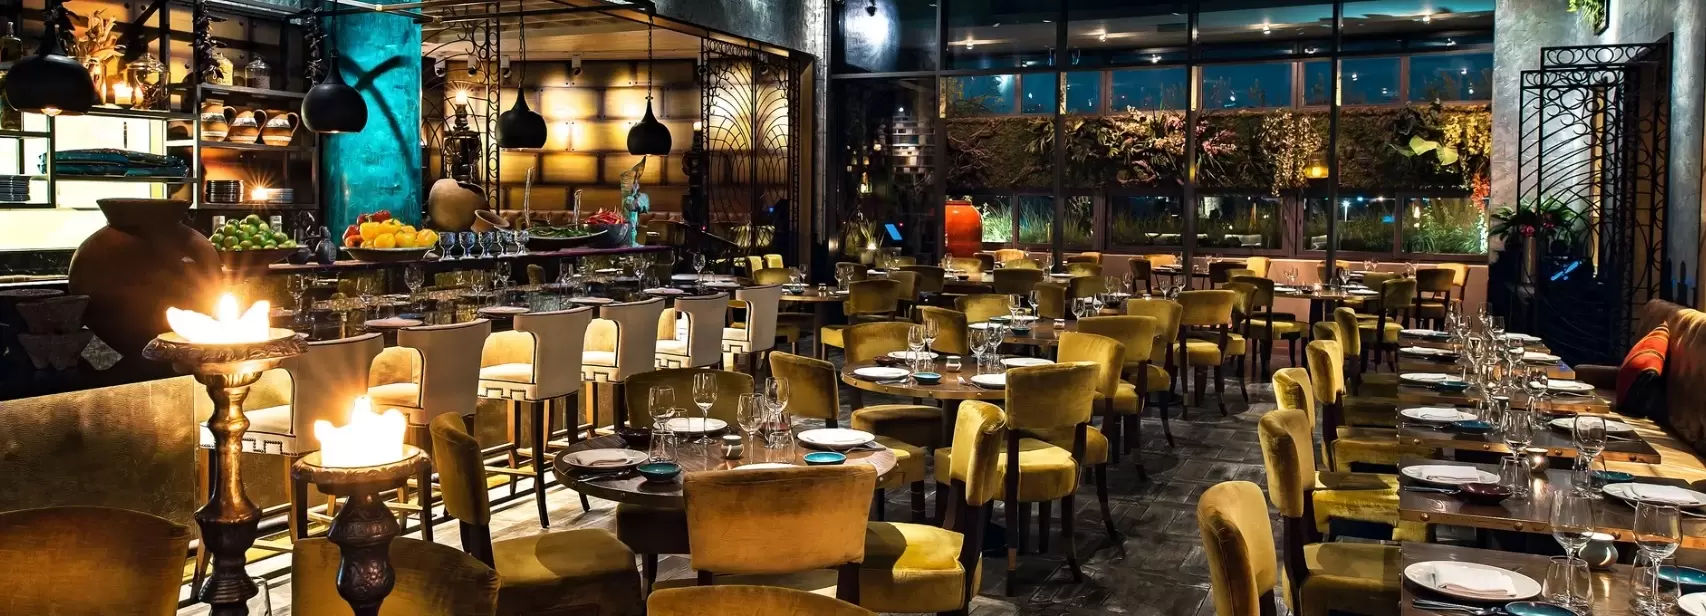 5-star dining in Kuwait City